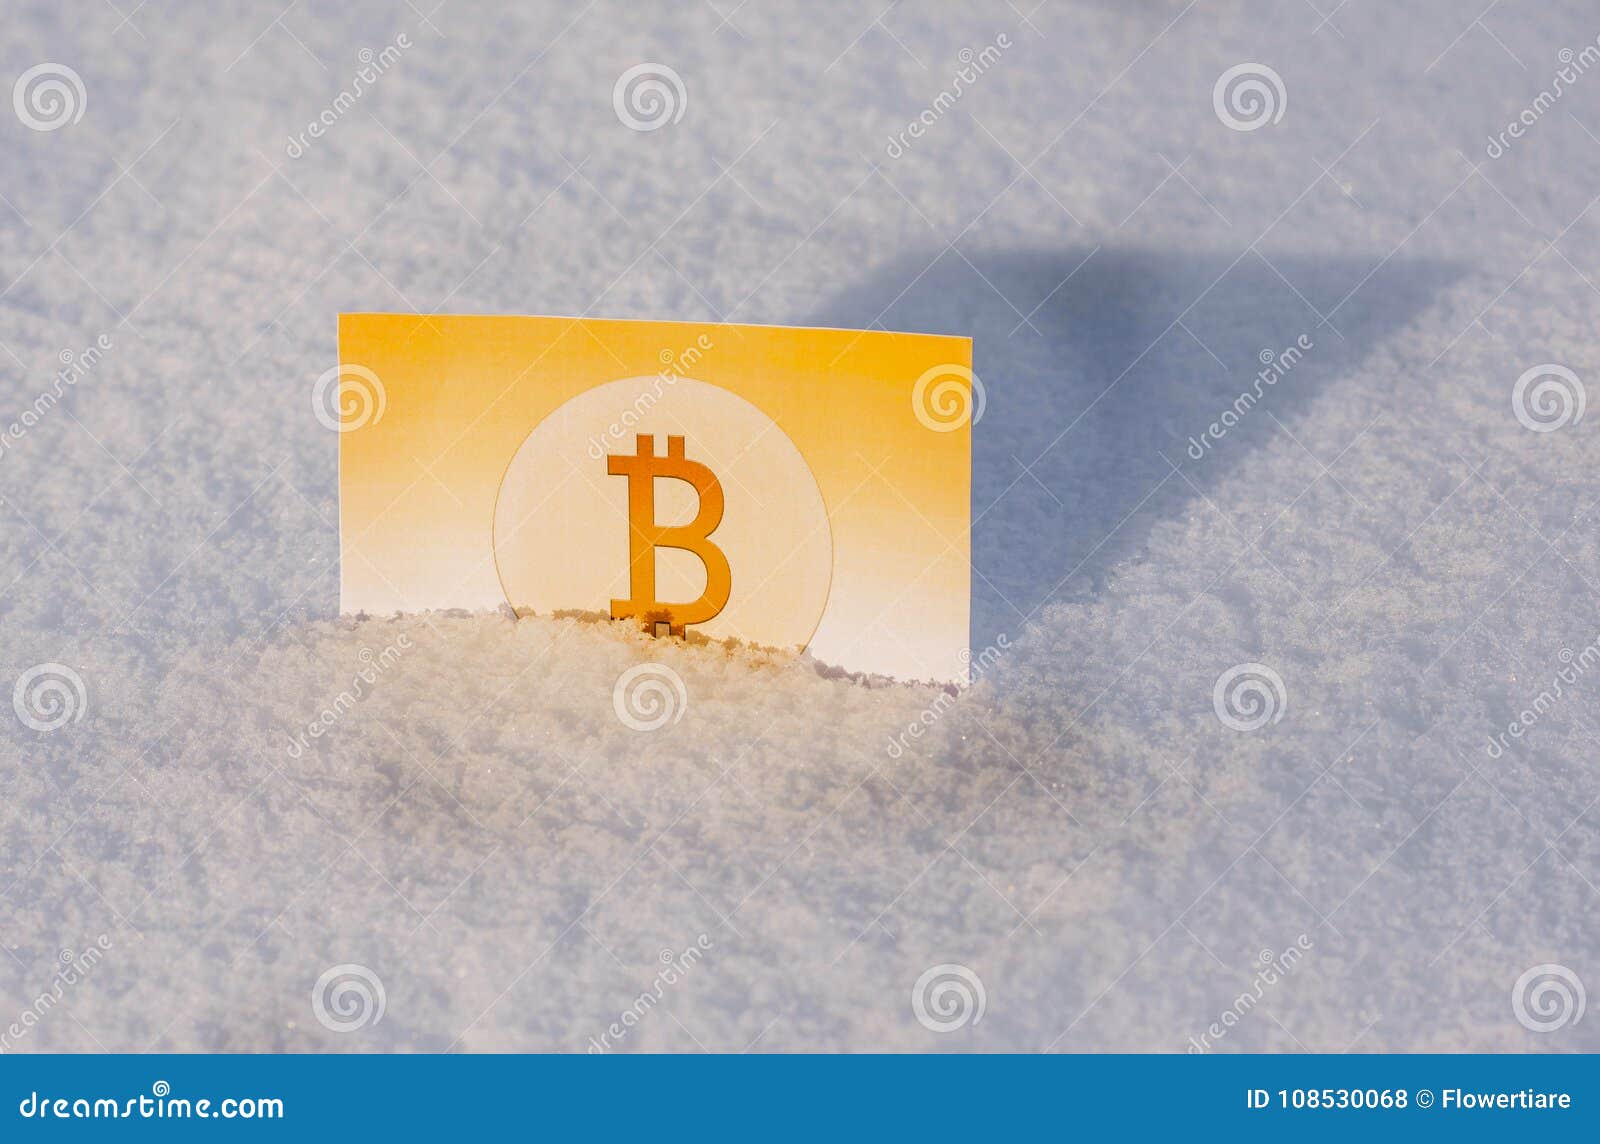 Paper Gold Money Bitcoin In The Snow In Winter. Frozen ...